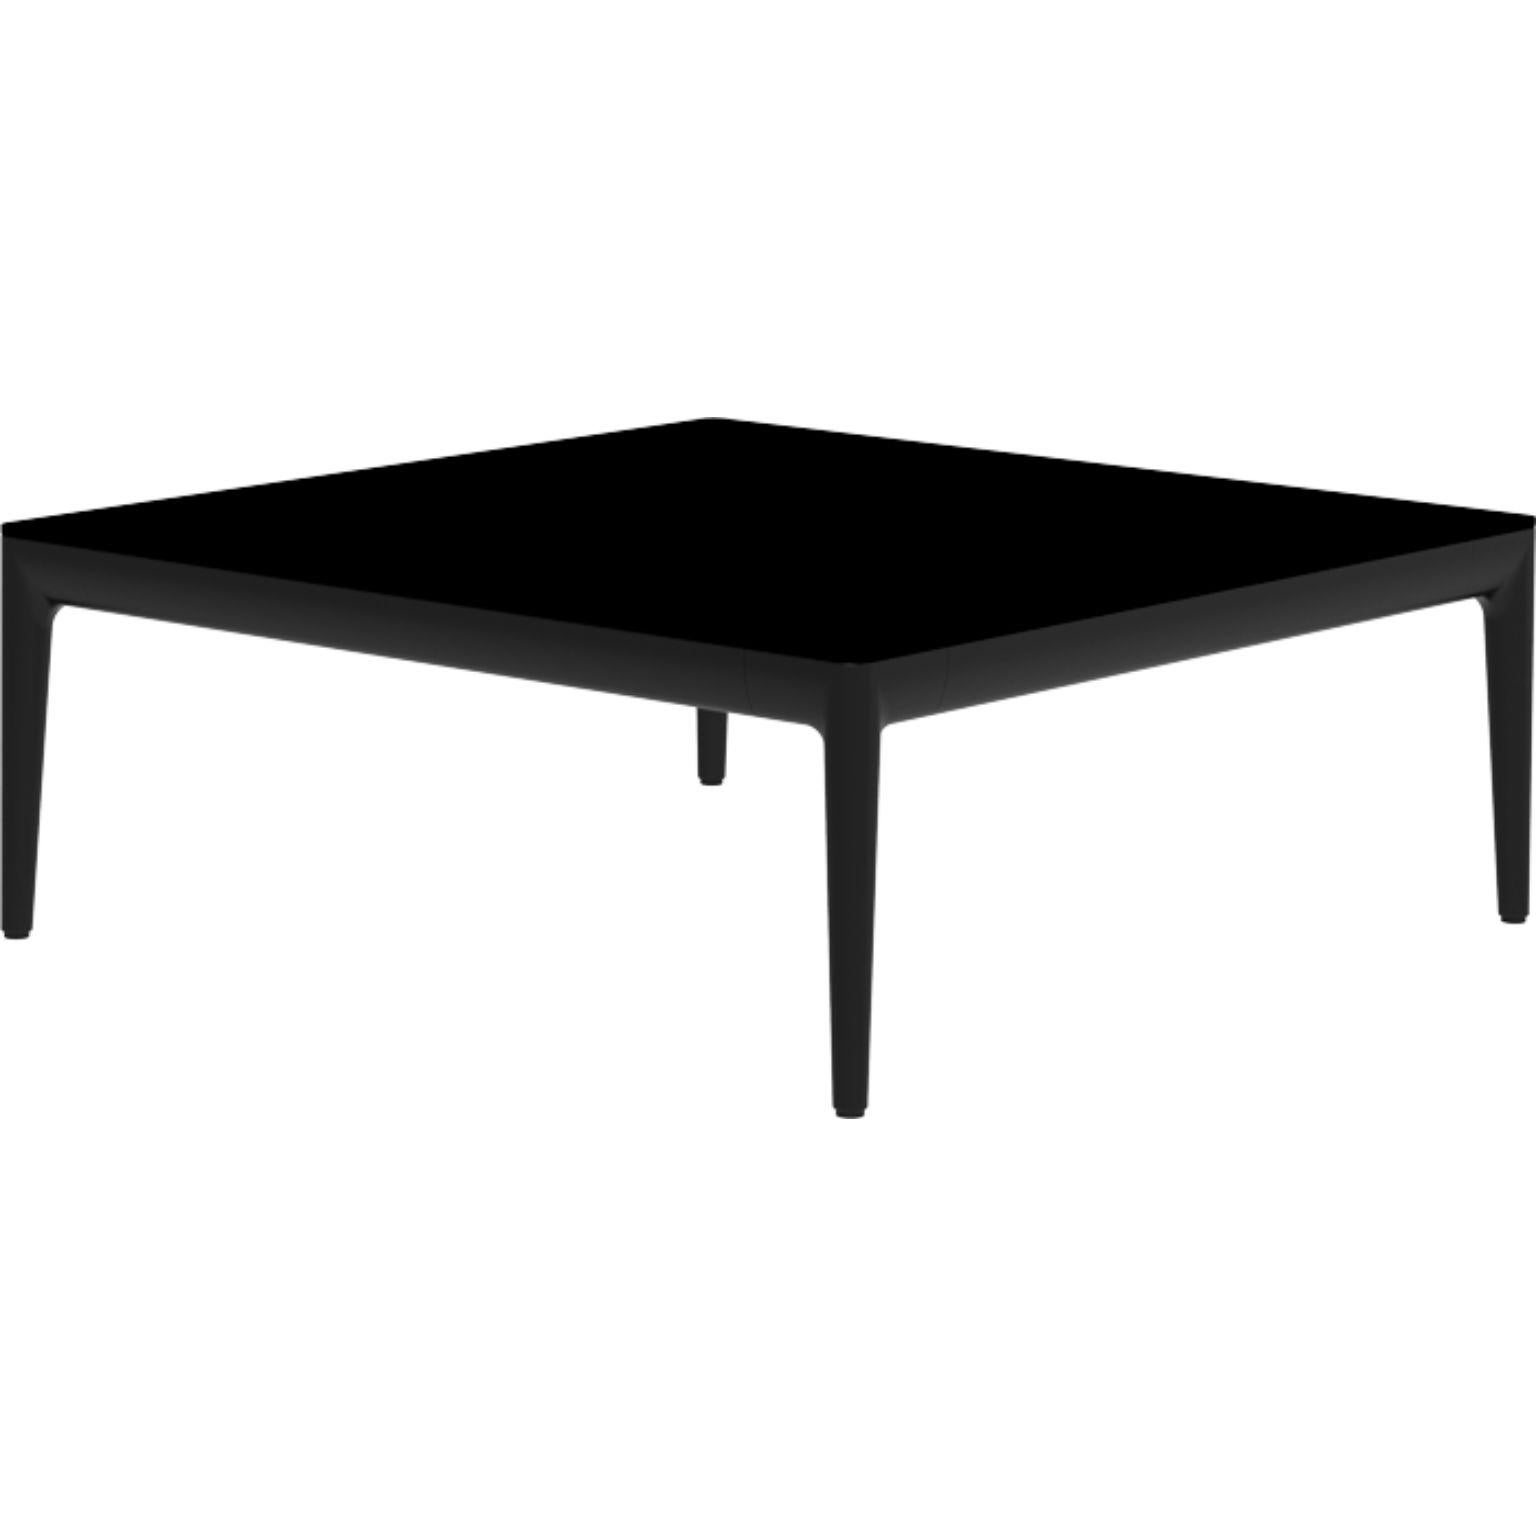 Ribbons Black 76 coffee table by MOWEE
Dimensions: D76 x W76 x H29 cm
Material: Aluminum and HPL top.
Weight: 12 kg.
Also available in different colors and finishes. (HPL Black Edge or Neolith top). 
An unmistakable collection for its beauty